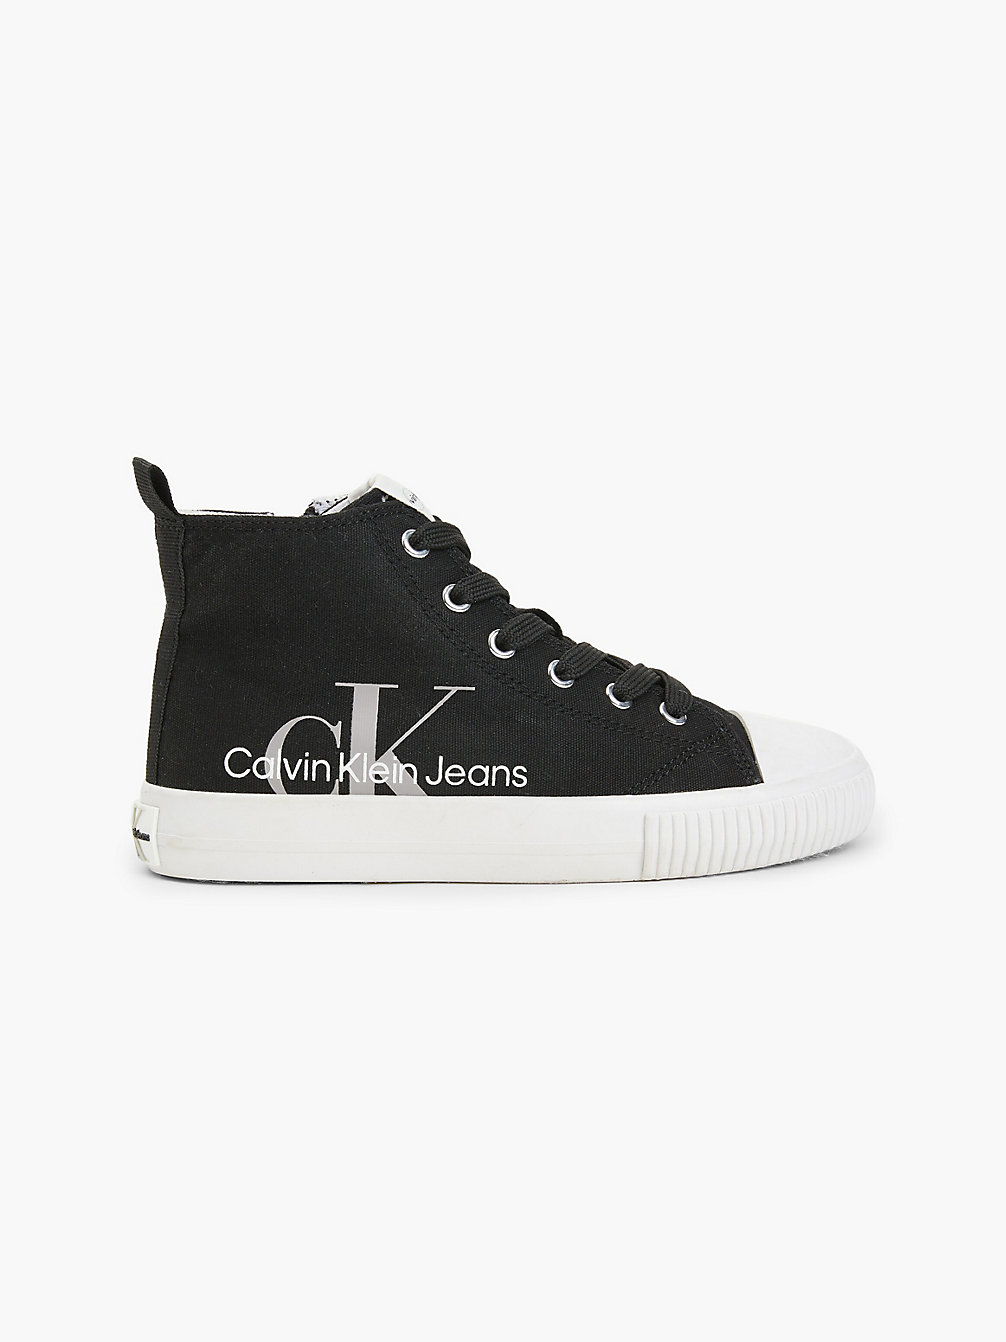 BLACK Recycled Canvas High-Top Trainers undefined kids unisex Calvin Klein